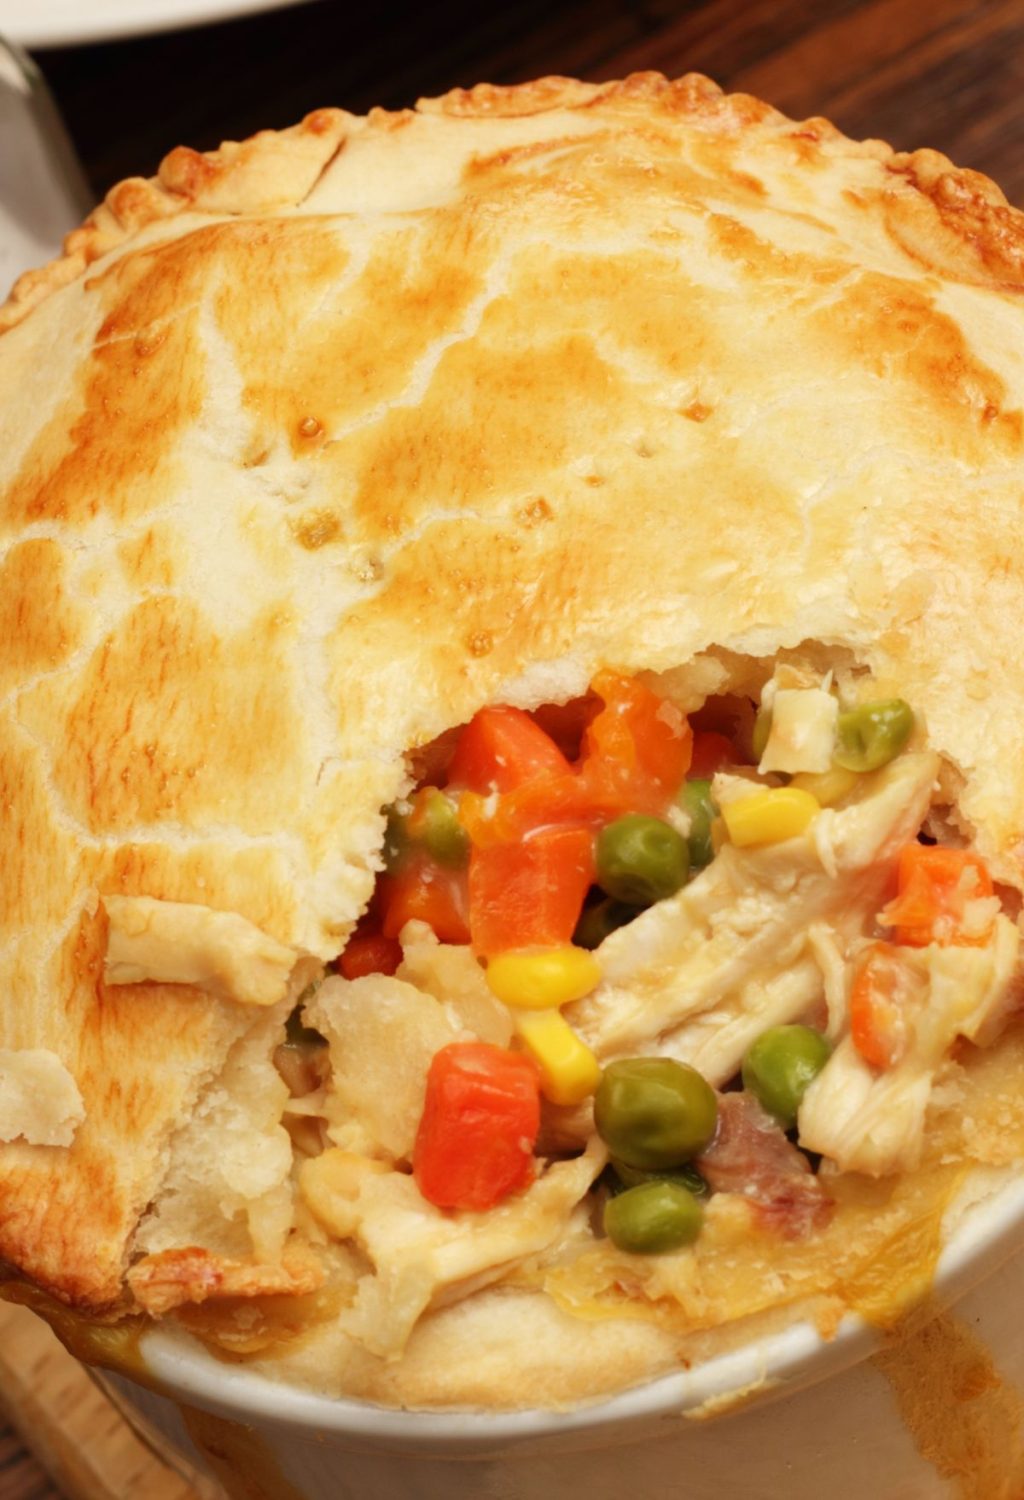 A chicken pot pie is sitting on a wooden table.